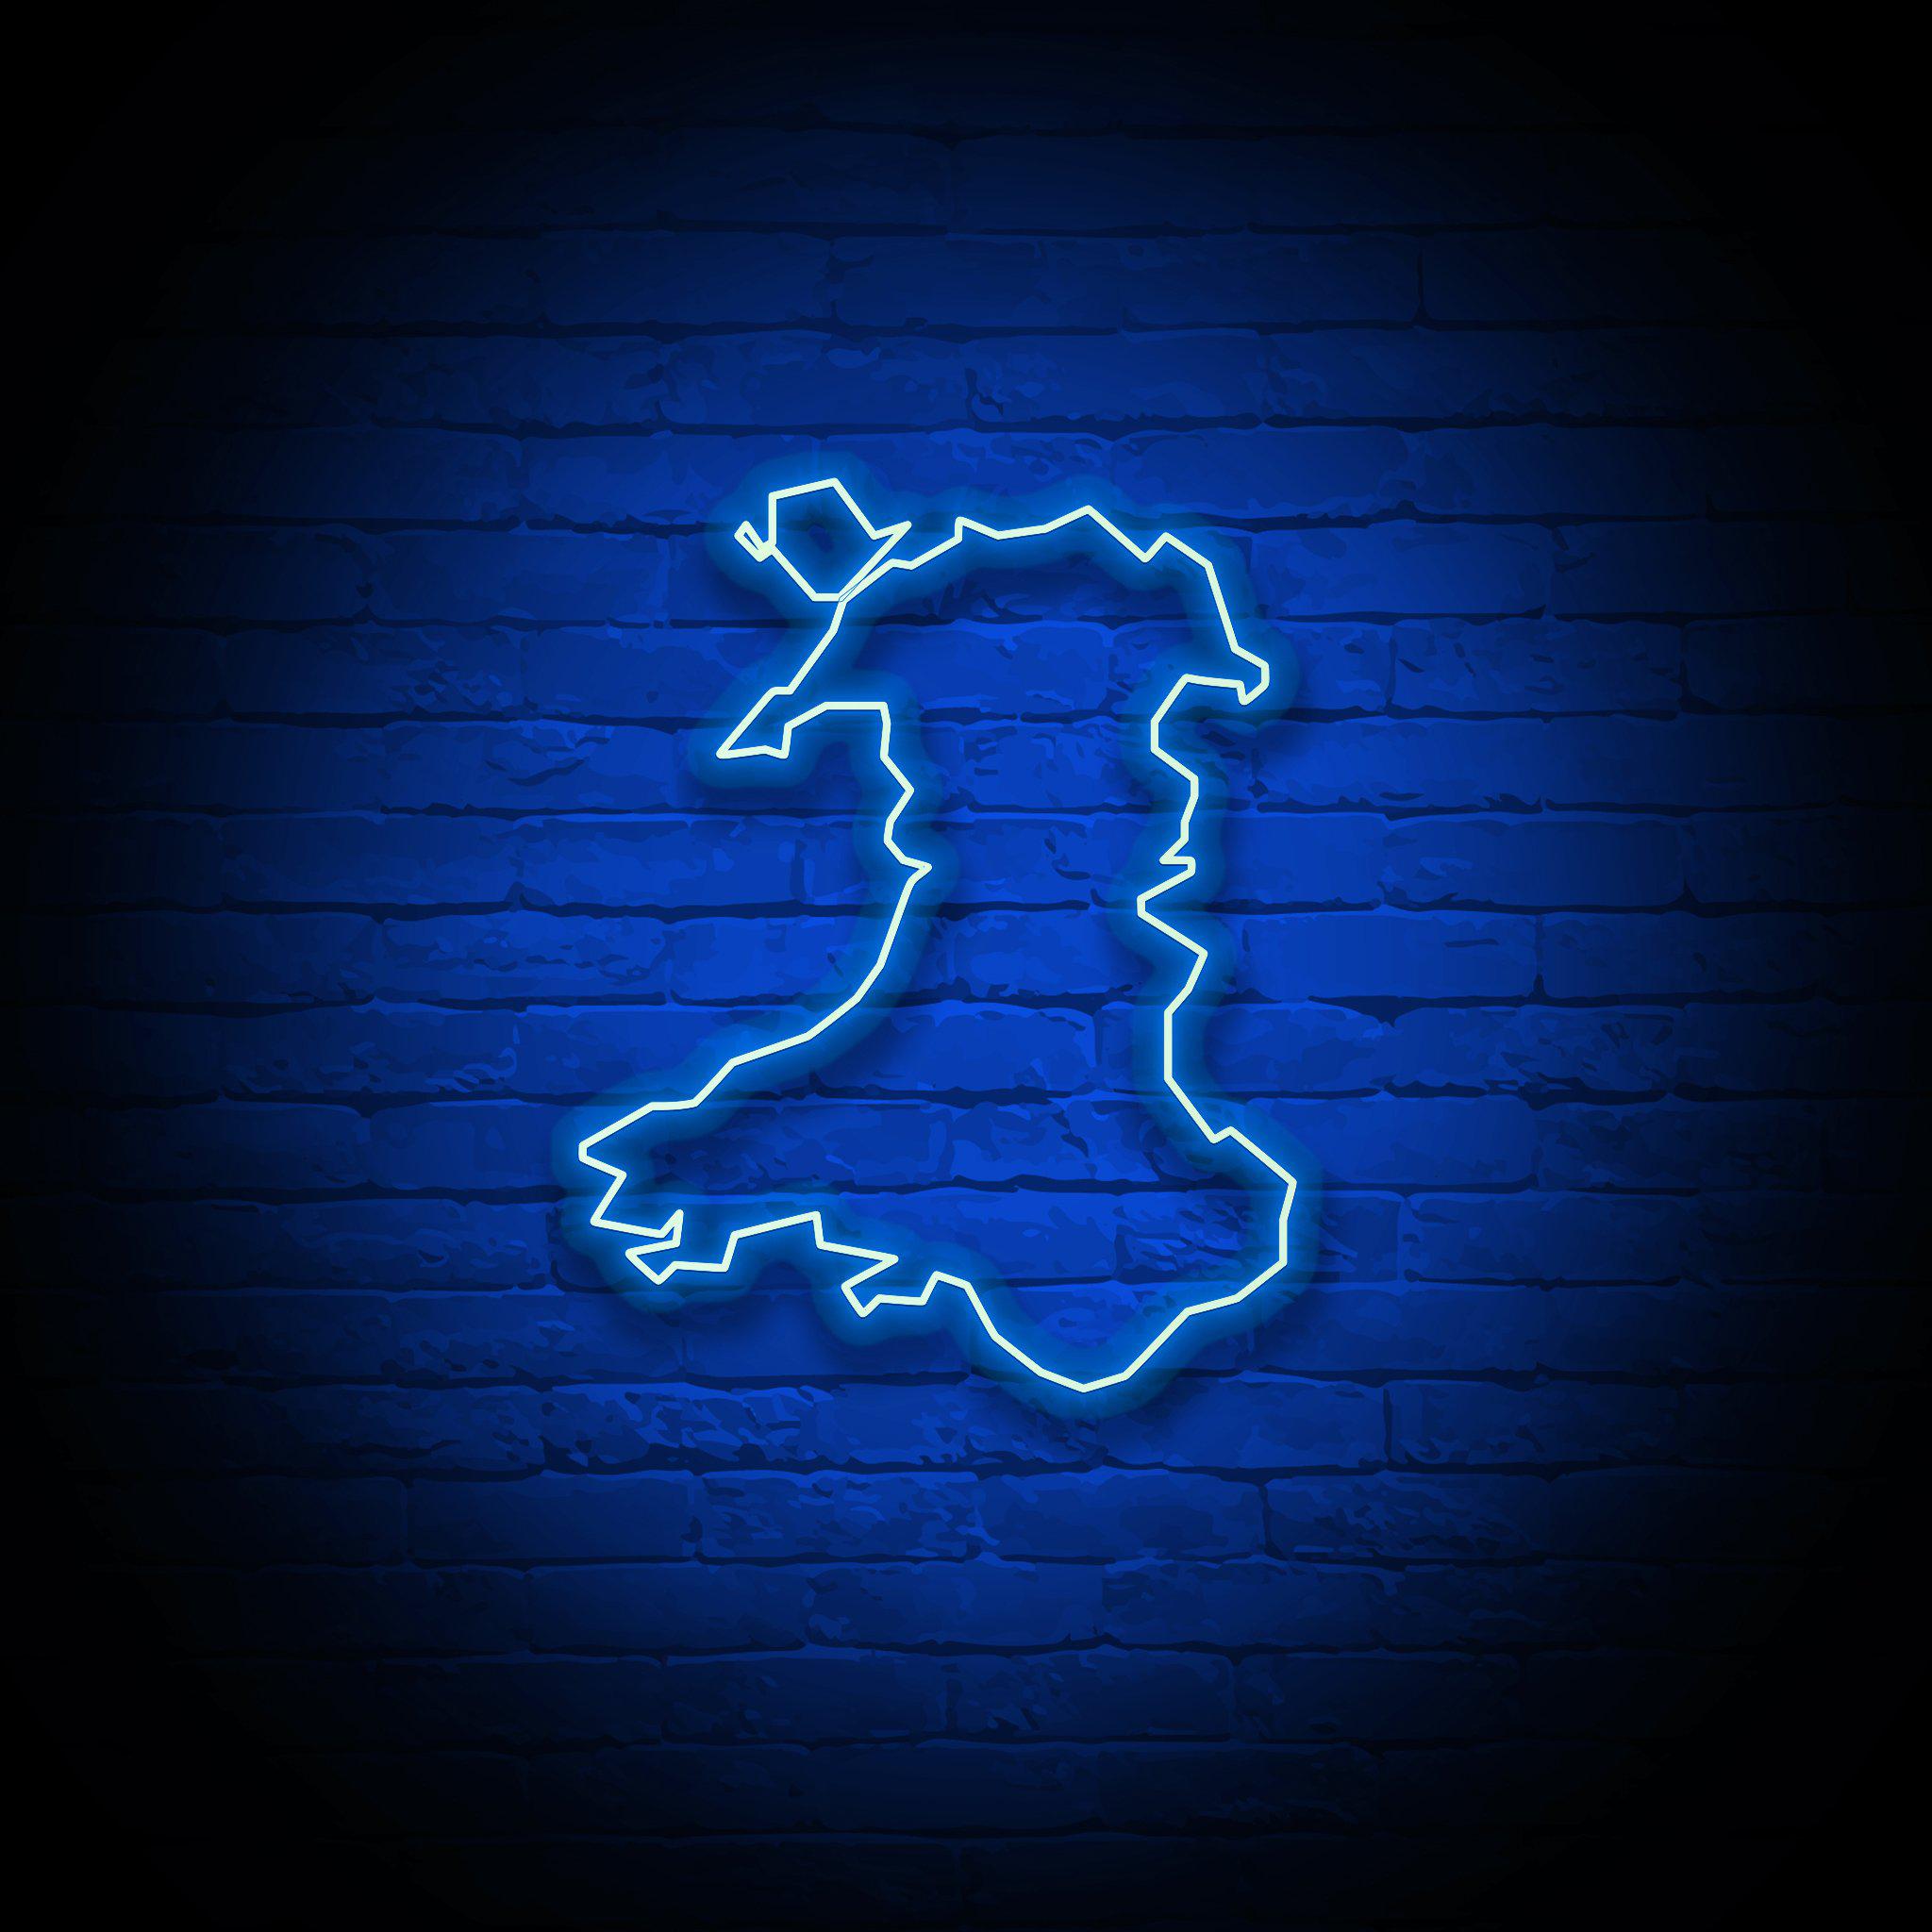 'WALES' NEON SIGN